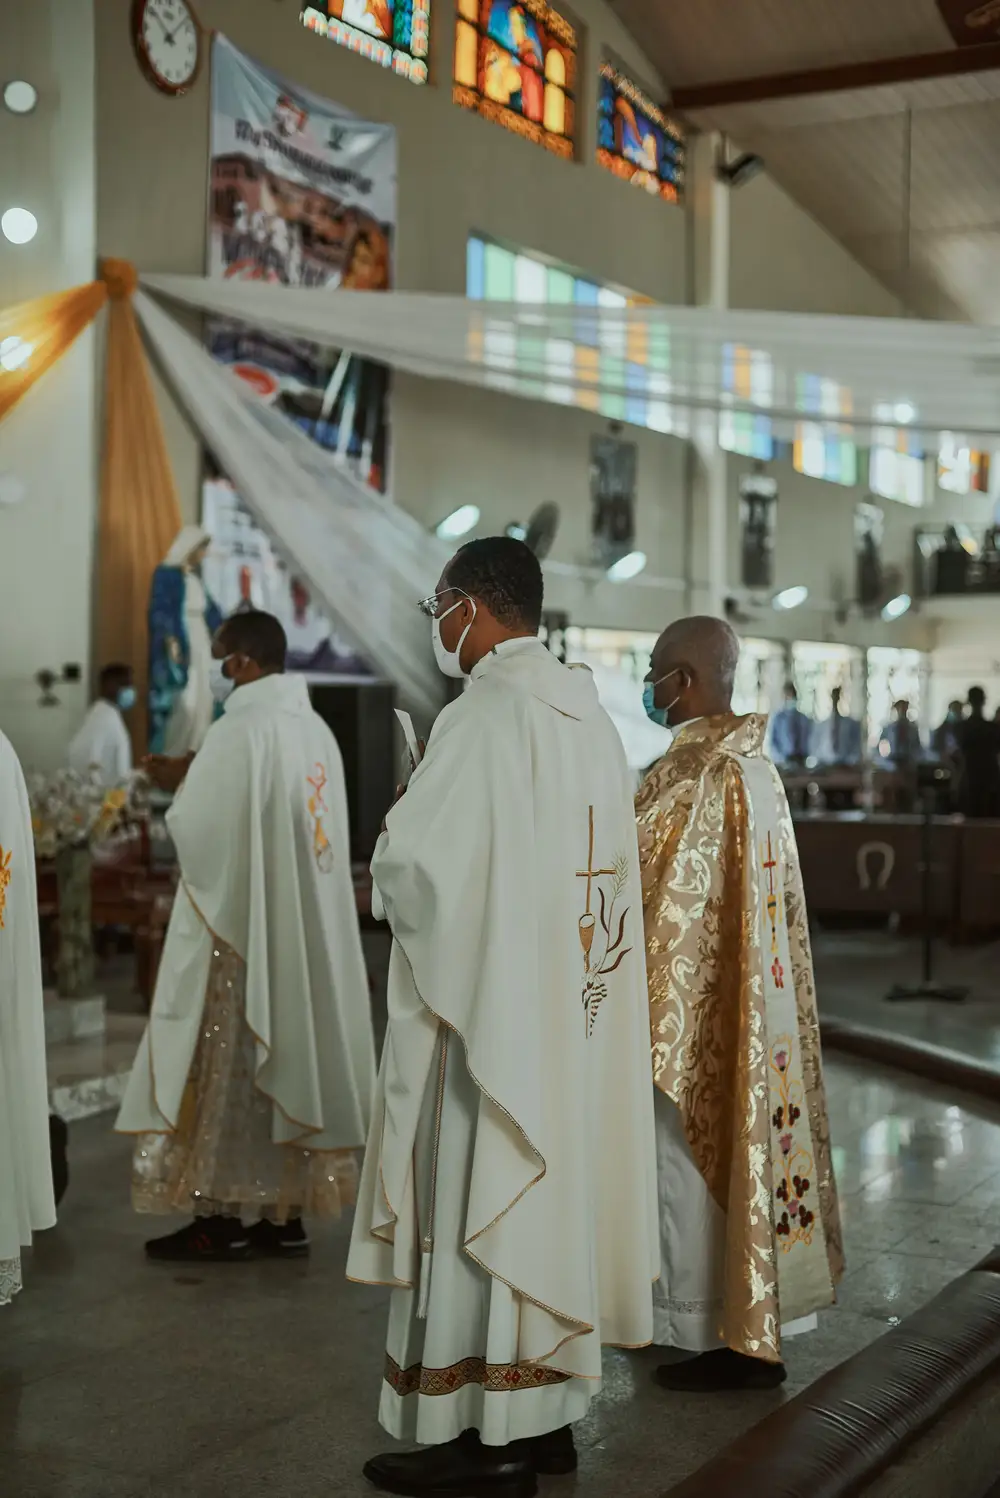 Catholic Priests ministering at the altar.